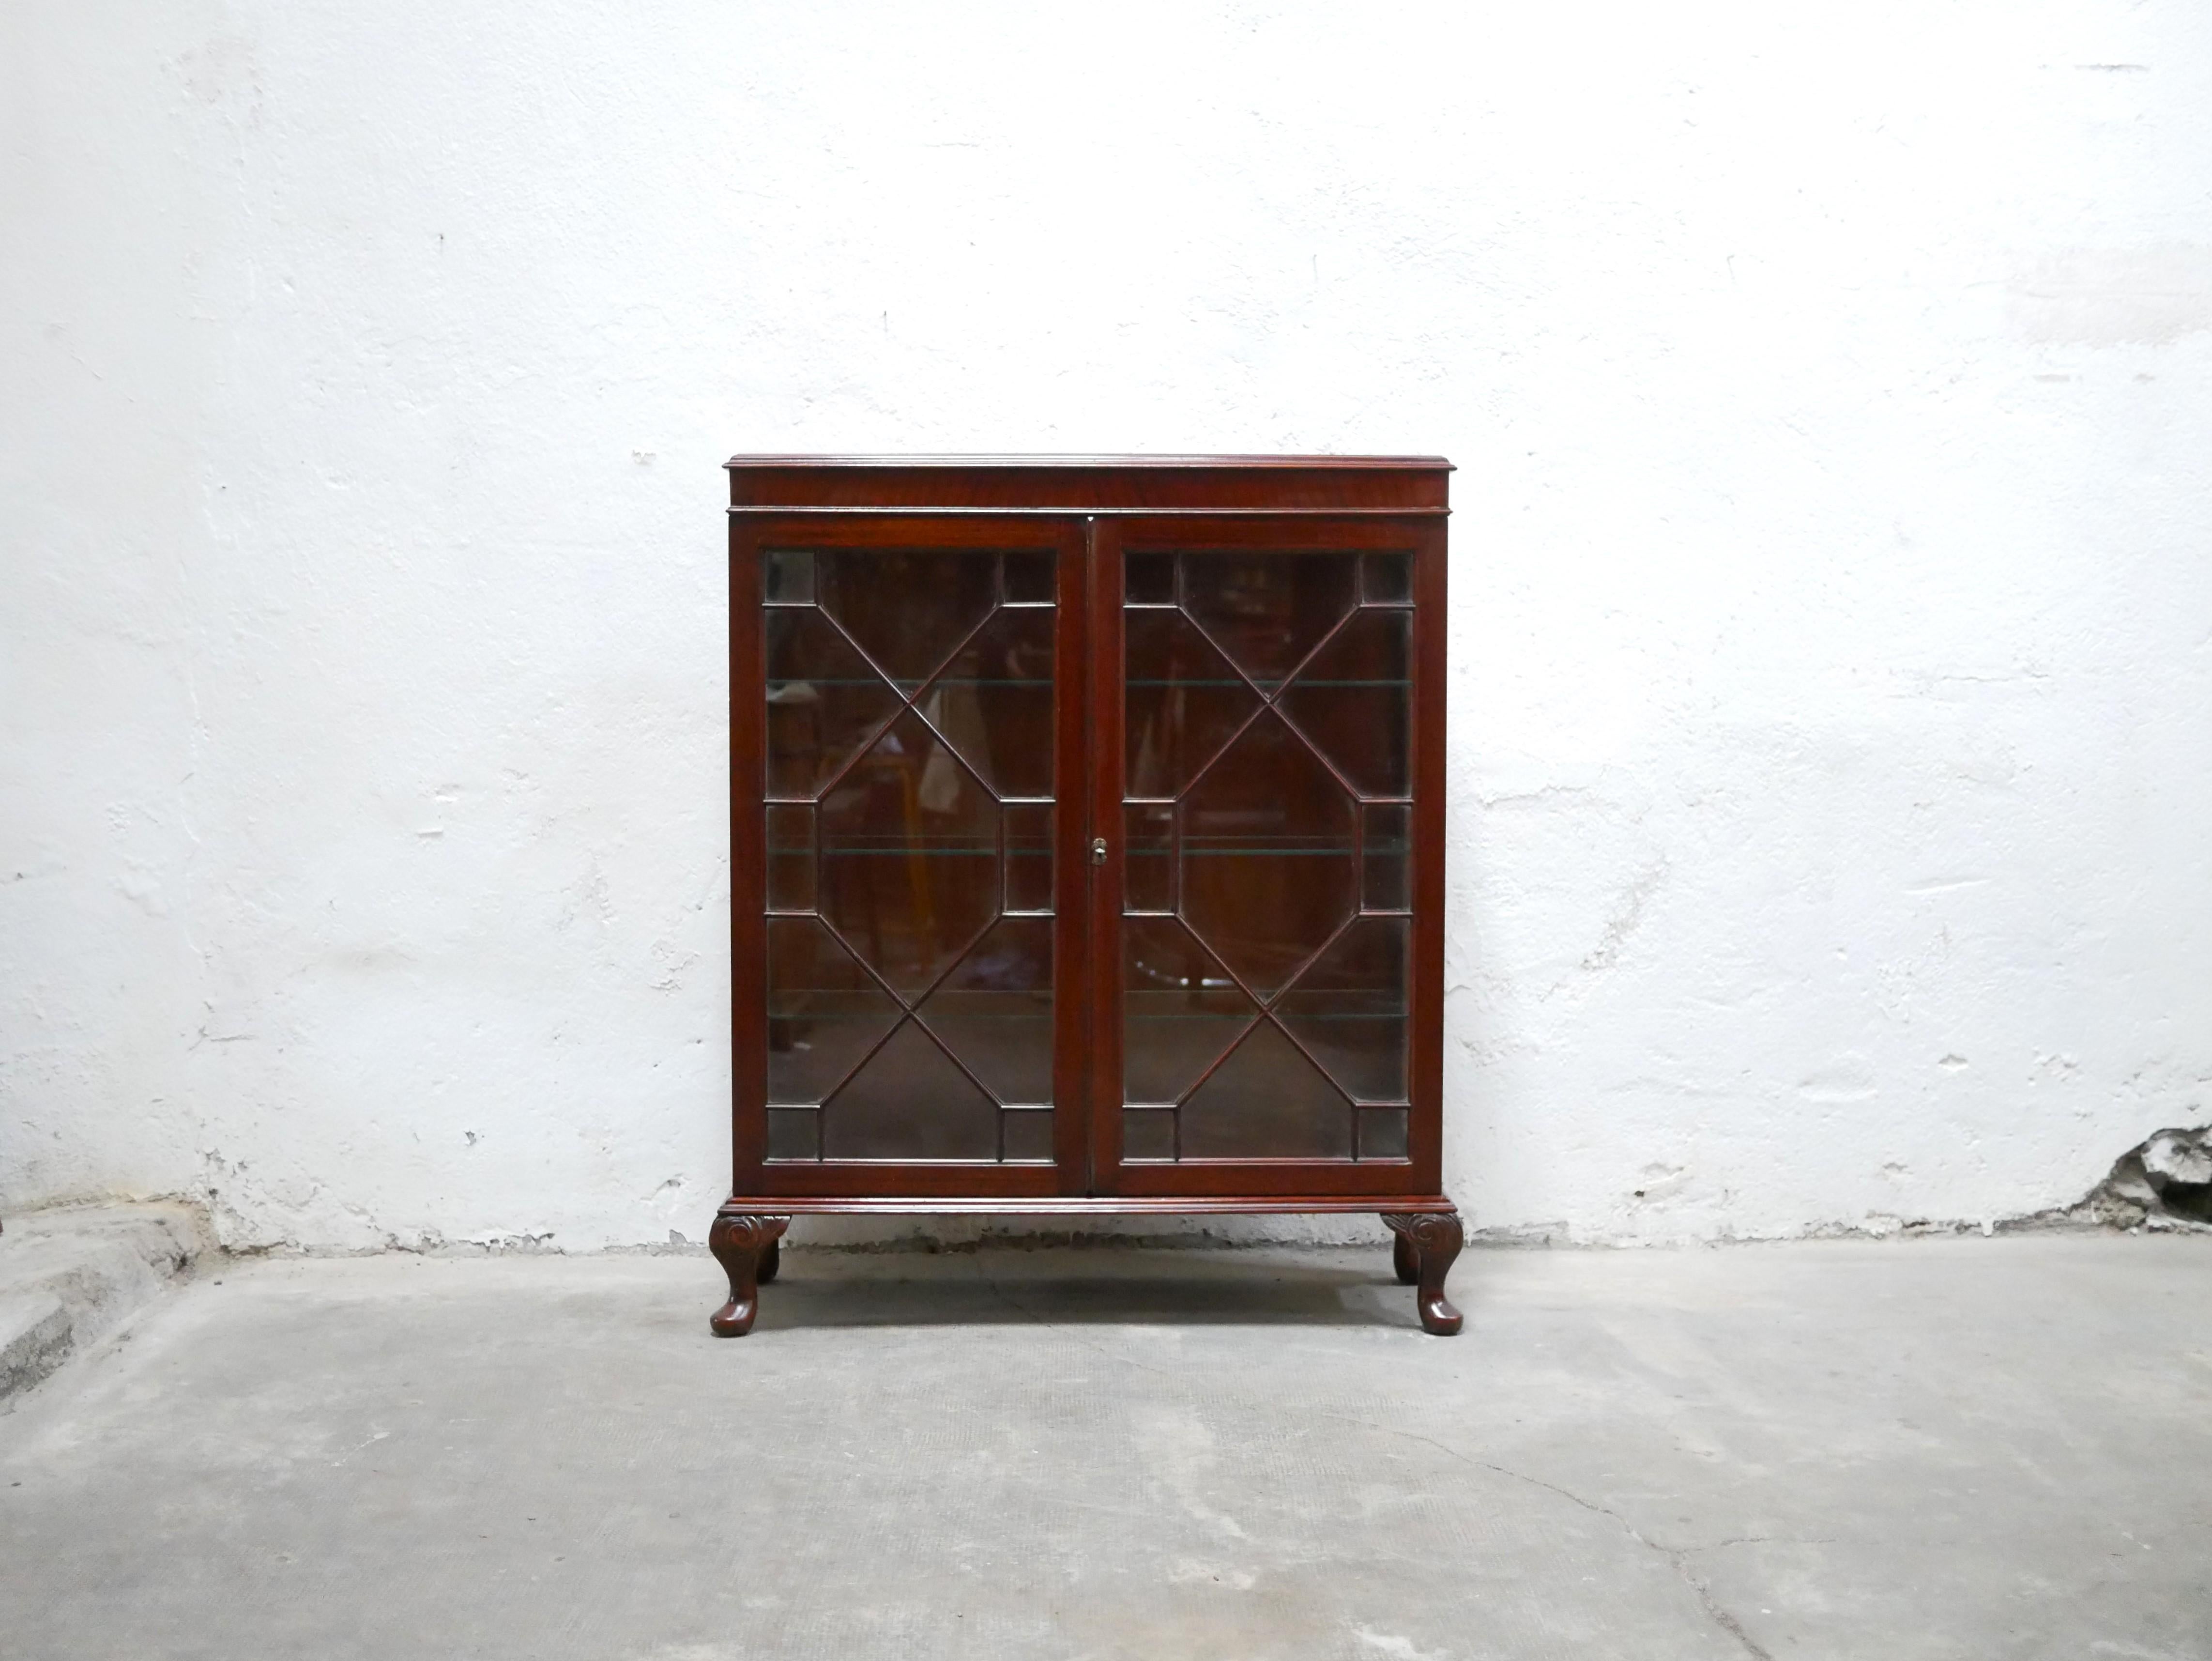 English mahogany display cabinet dating from the 1960s.

The color of the wood is bright and warm. Its small size, its glass doors adorned with wooden strips, the curve of its legs and its glass sides give it a lot of character and elegance.
